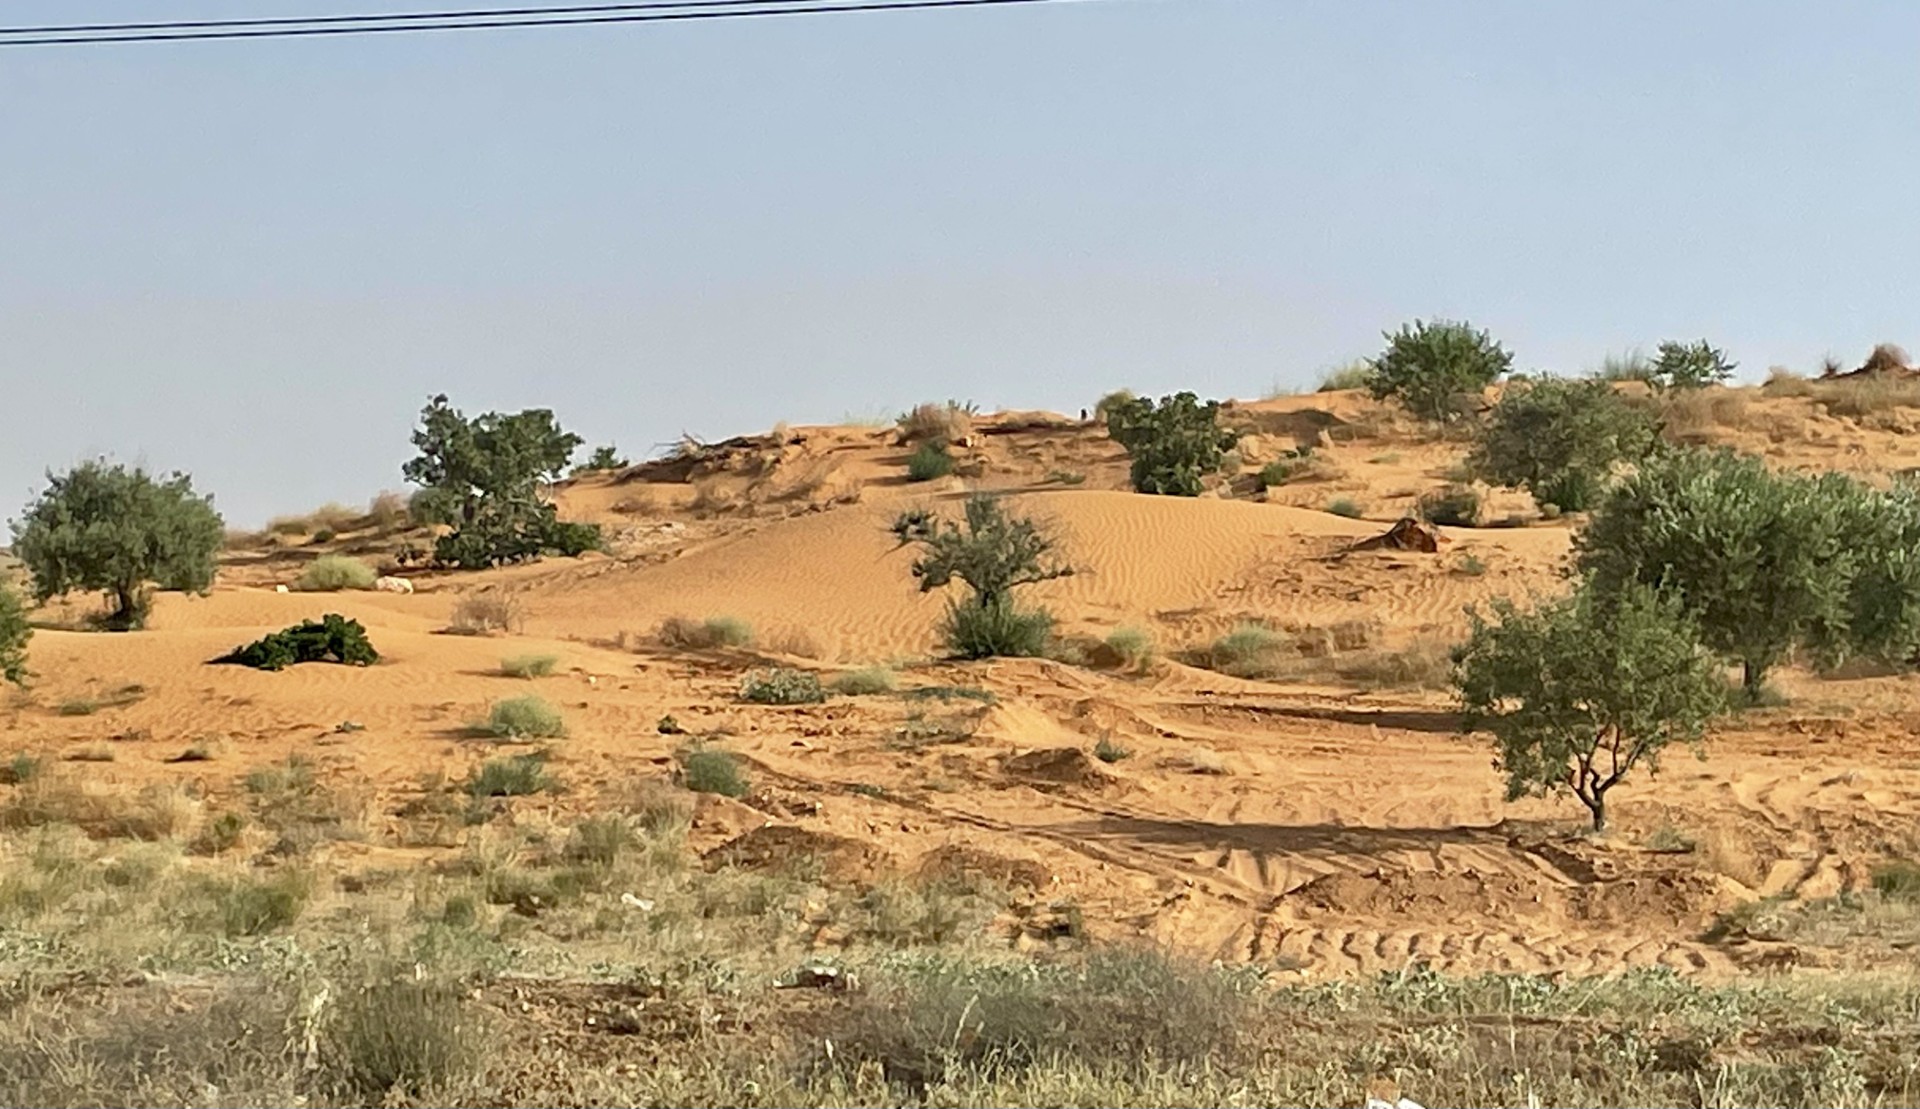 Sand dune in Libya's Jabal Nafusa with some scrub brush and trees. Sky is clear blue with no clouds